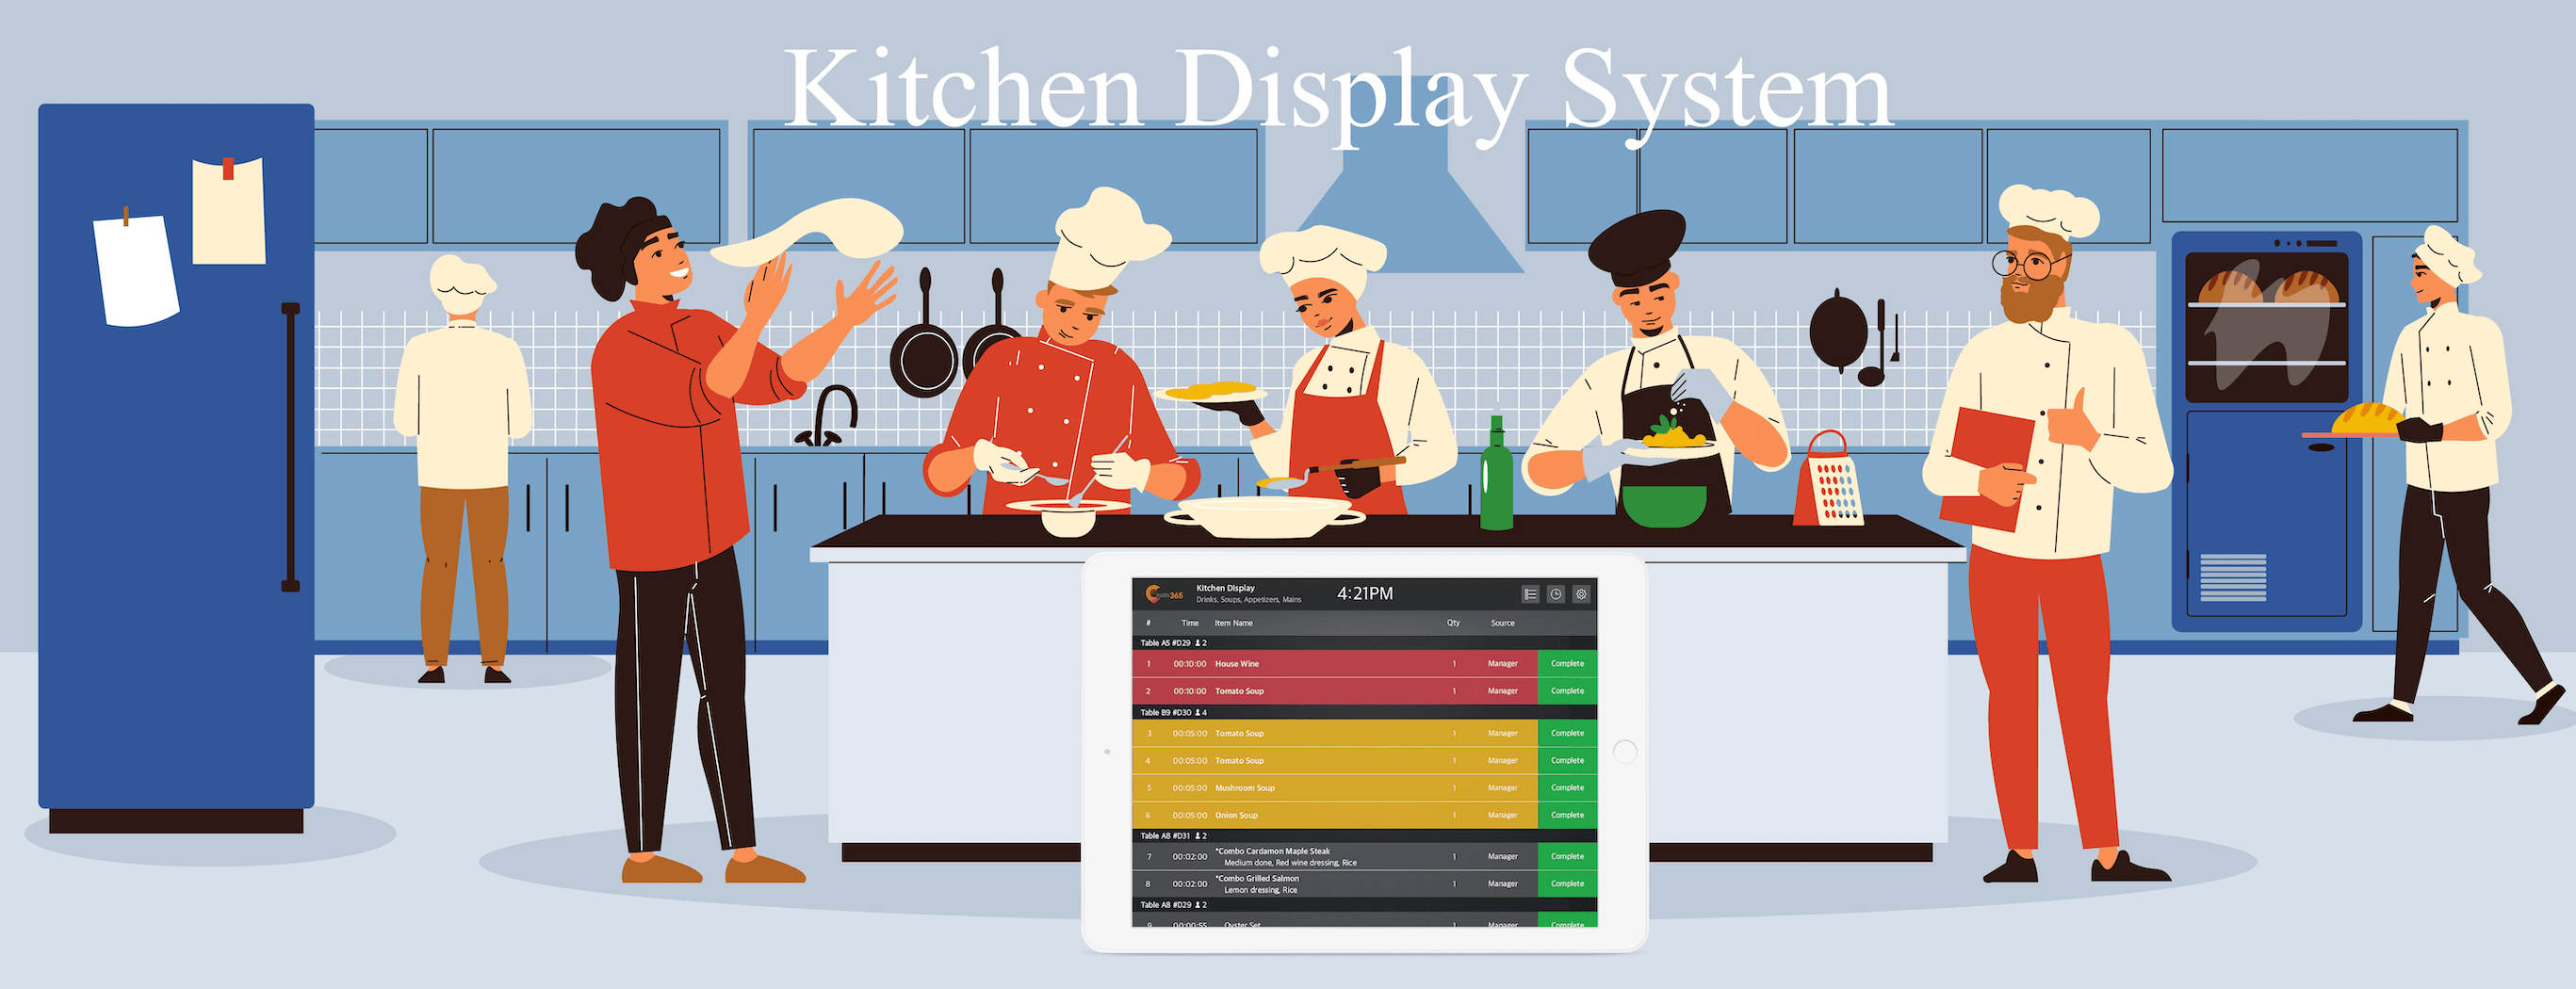 Kitchen Display System: The Must-have Kitchen Aid Device For Restaurant Chefs 